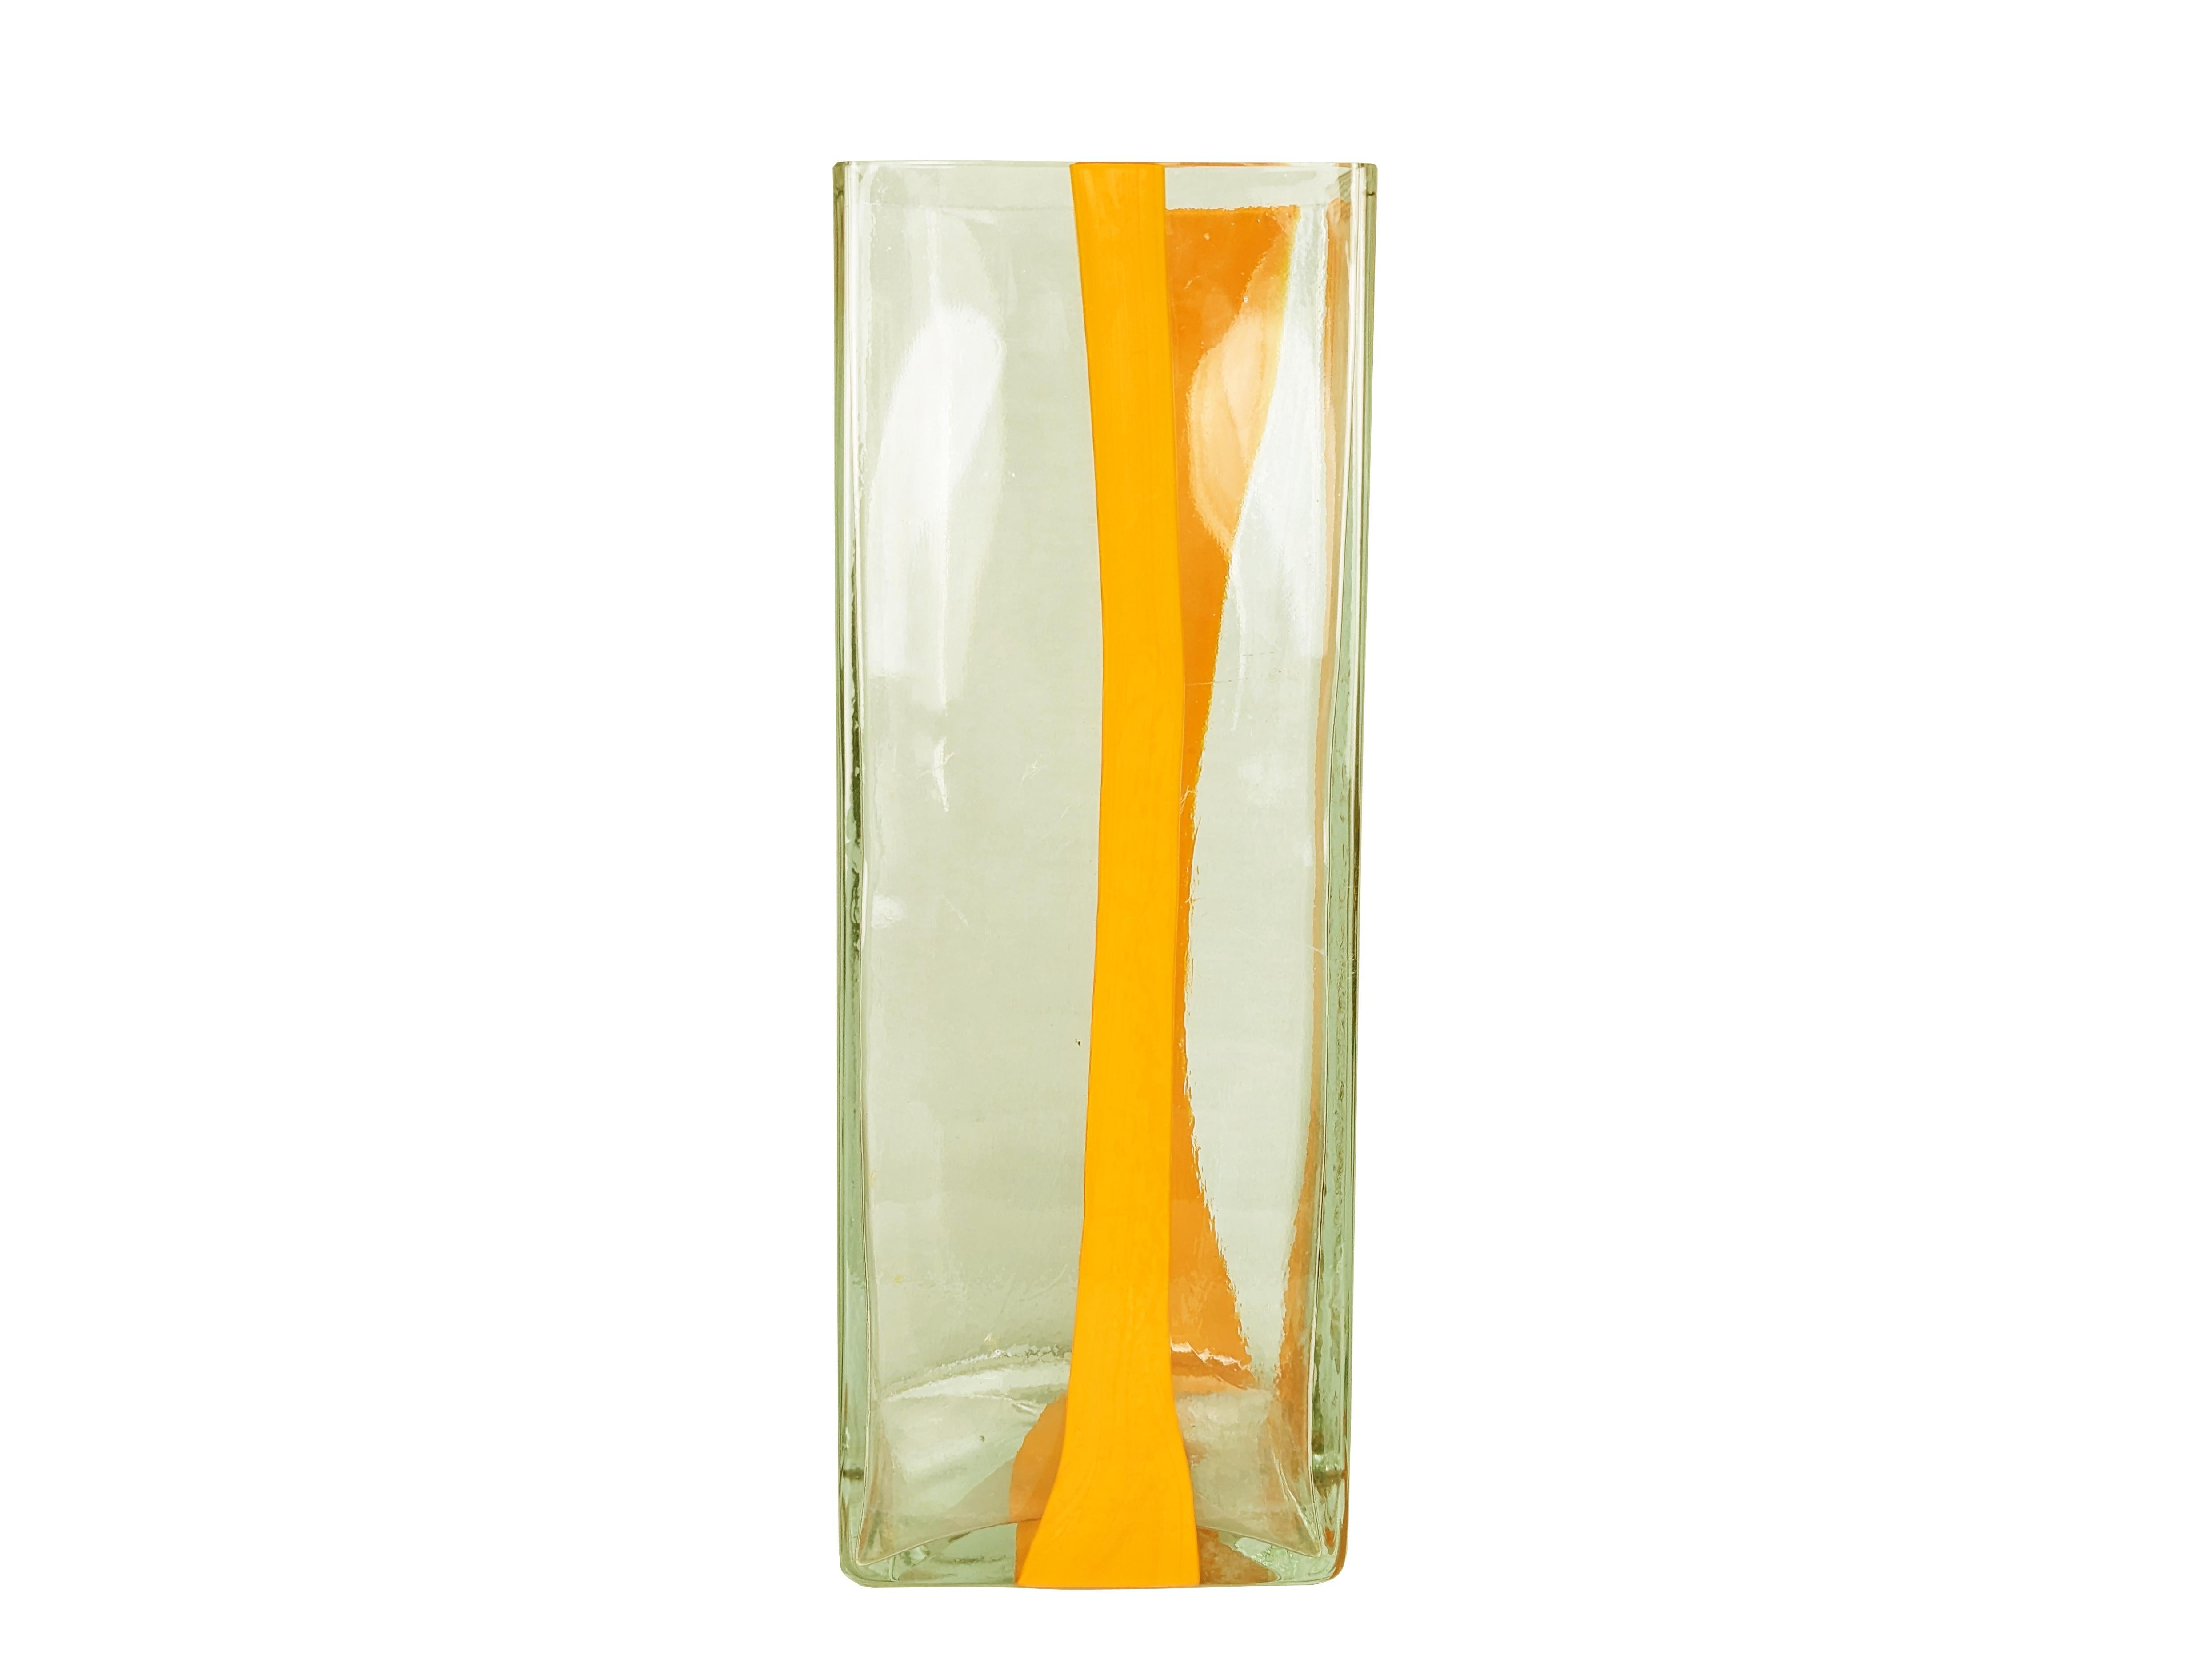 Large orange & clear Murano glass vase/umbrella stand designed by Pierre Cardin for Venini in the 1970s.The vase is made with the mold casting glass technique. The version of this size is quite rare. There are no engraved signatures or labels.